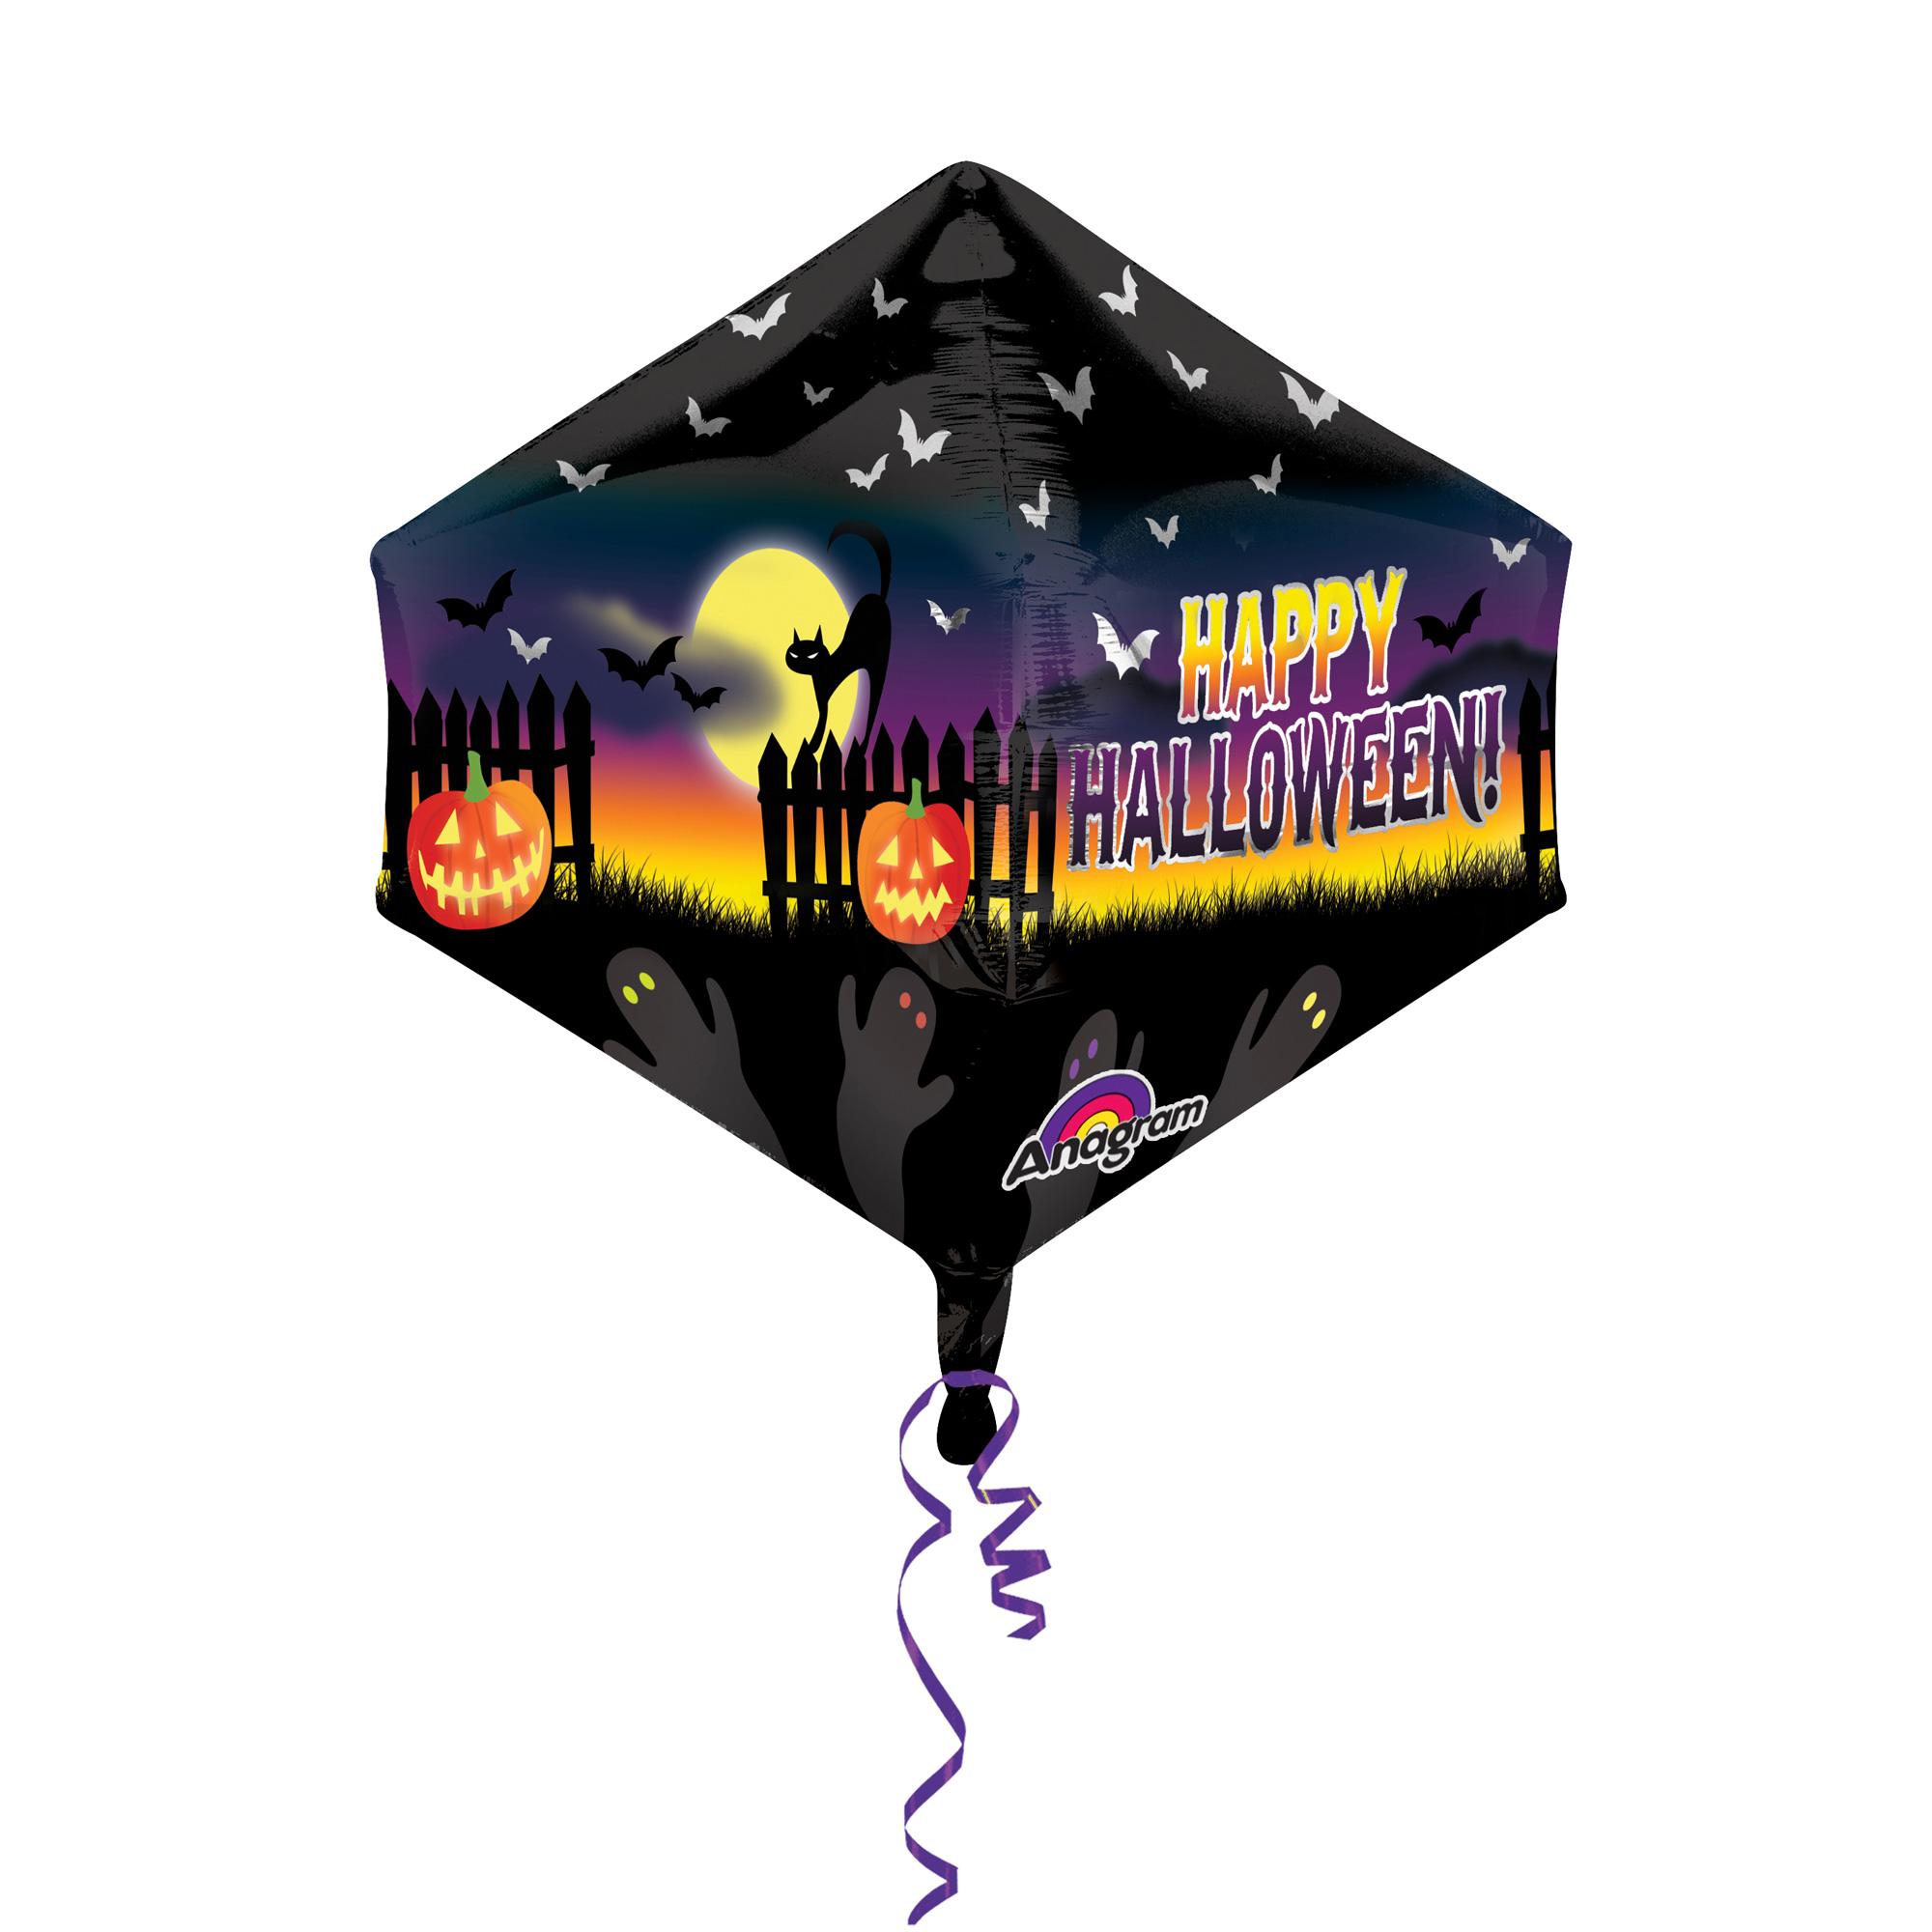 Haunted Halloween Scene Anglez Foil Balloon 17x21in Balloons & Streamers - Party Centre